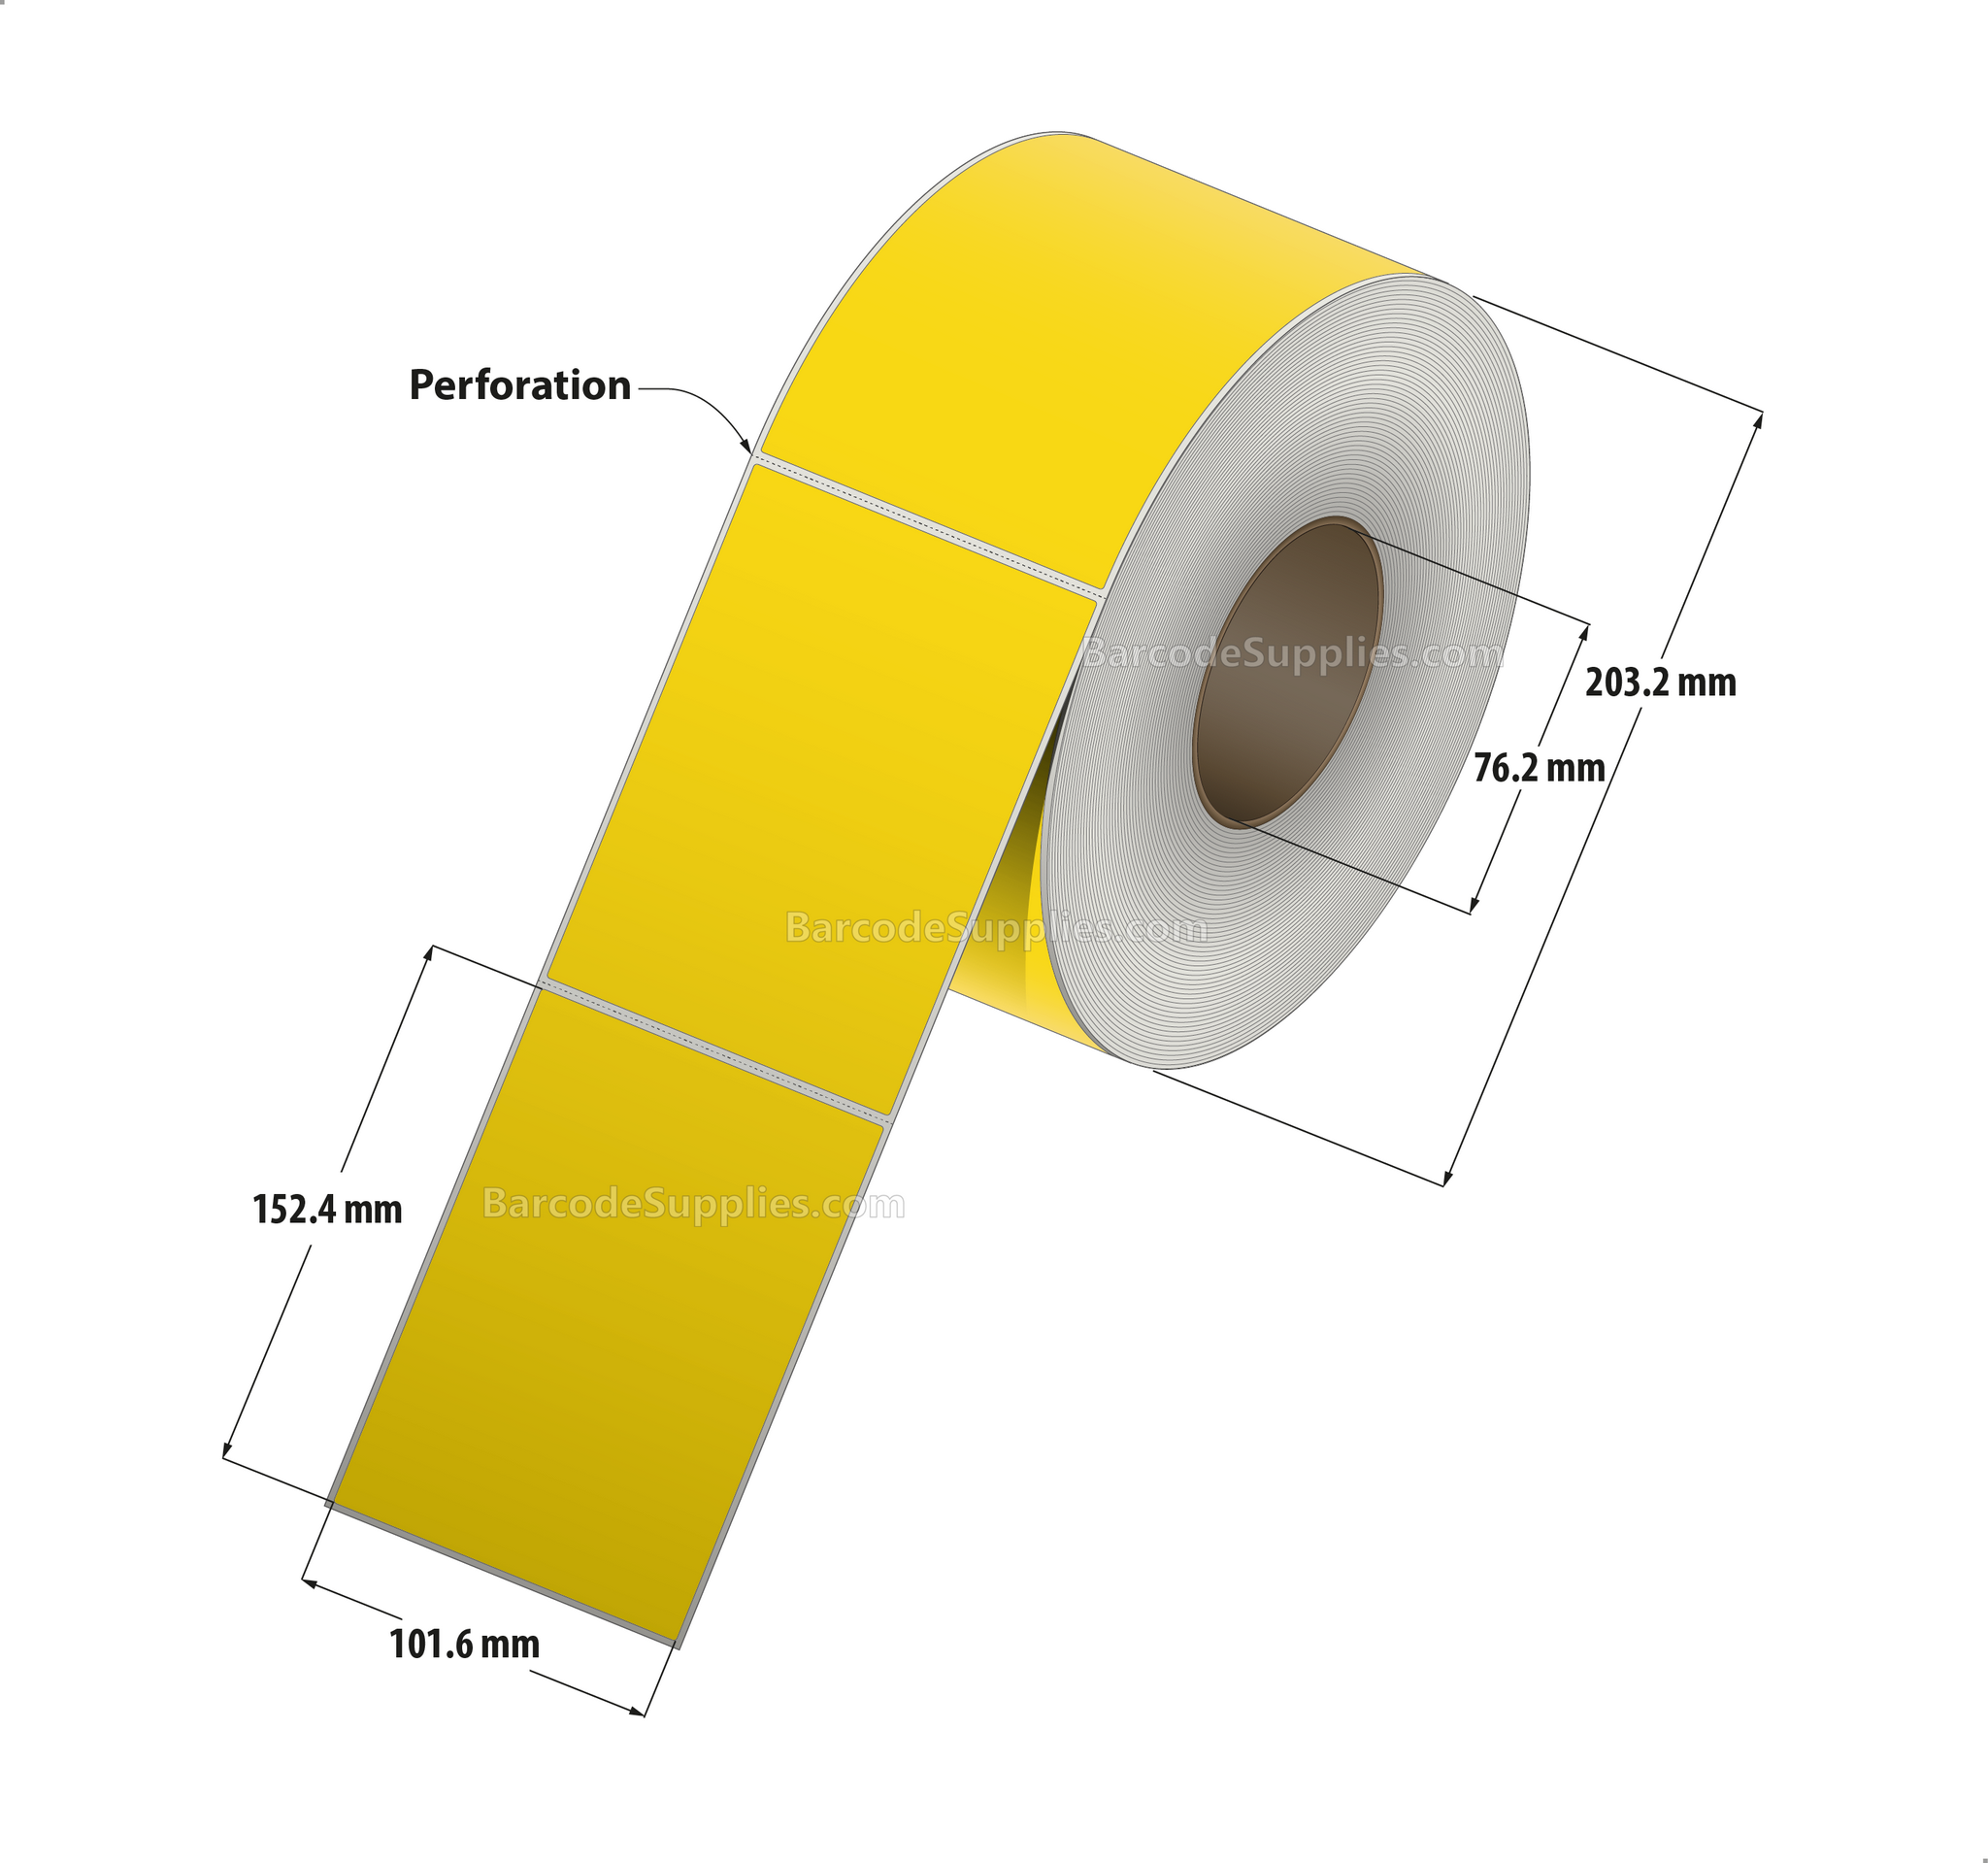 4 x 6 Thermal Transfer Pantone Yellow Labels With Permanent Acrylic Adhesive - Perforated - 1000 Labels Per Roll - Carton Of 4 Rolls - 4000 Labels Total - MPN: TH46-1PY